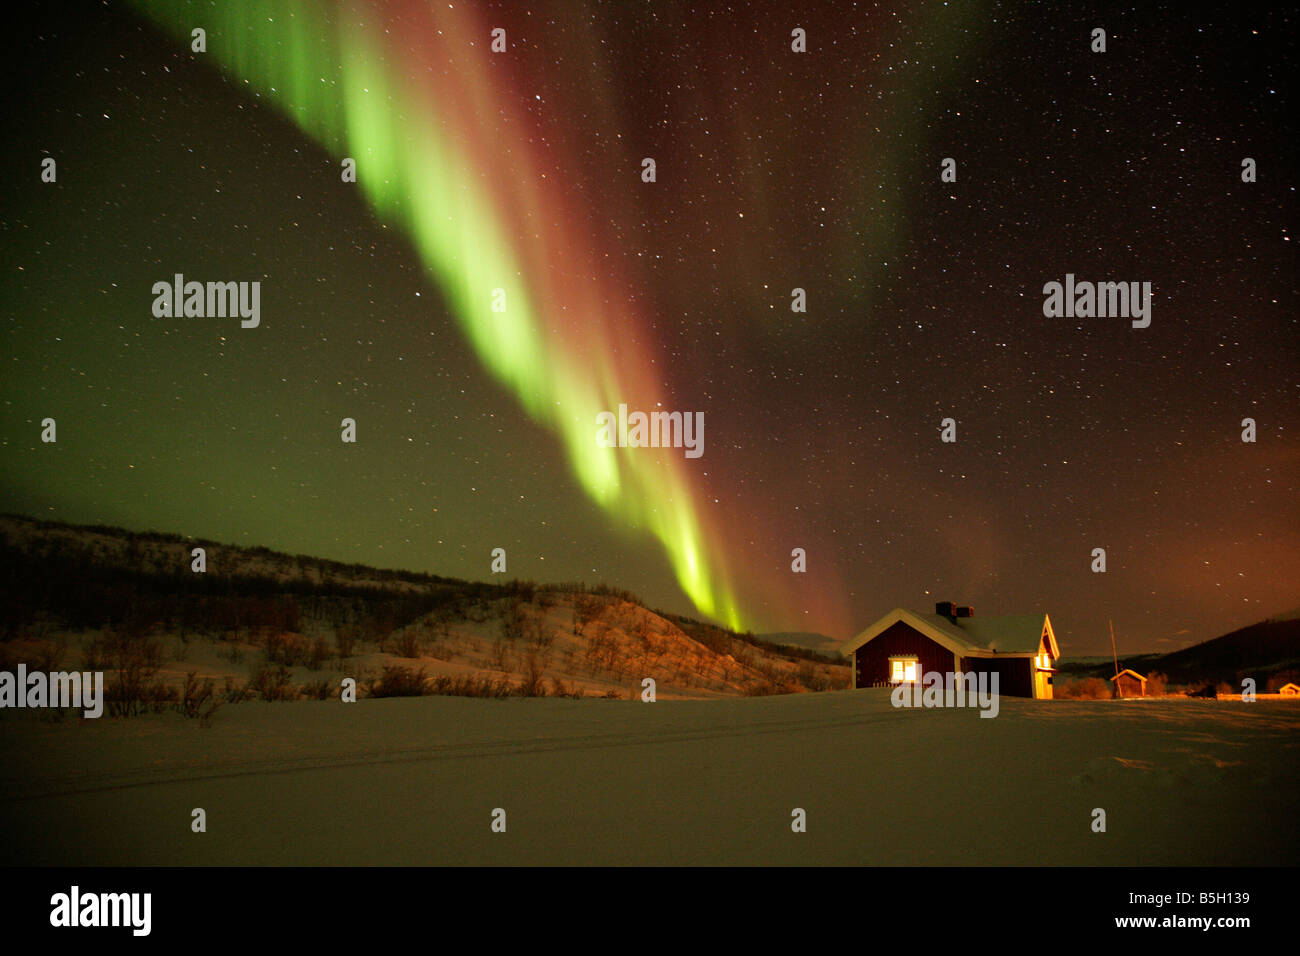 Hut in Northern Norway in the arctic circle with the Arora Borealis or Northern lights overhead Stock Photo